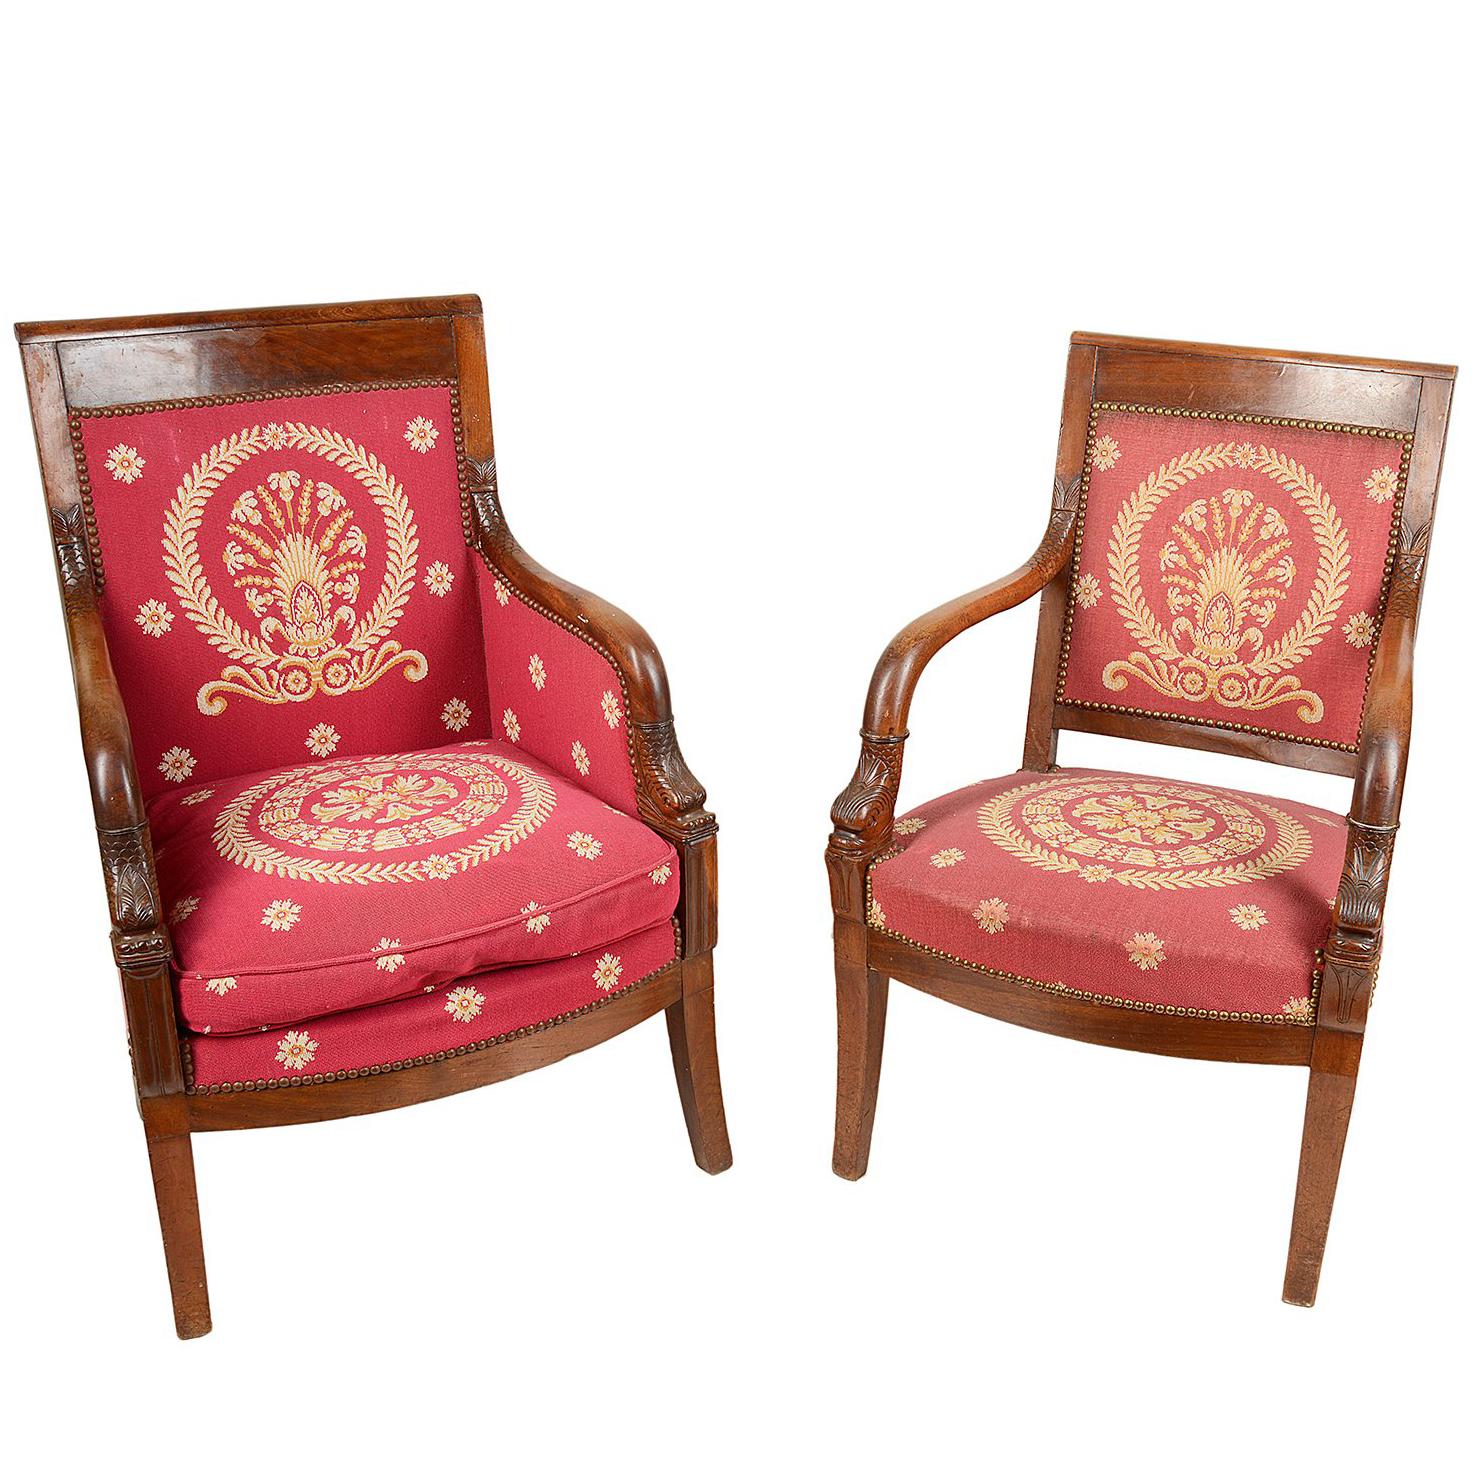 Matched Pair of French Empire Armchairs, 19th Century For Sale